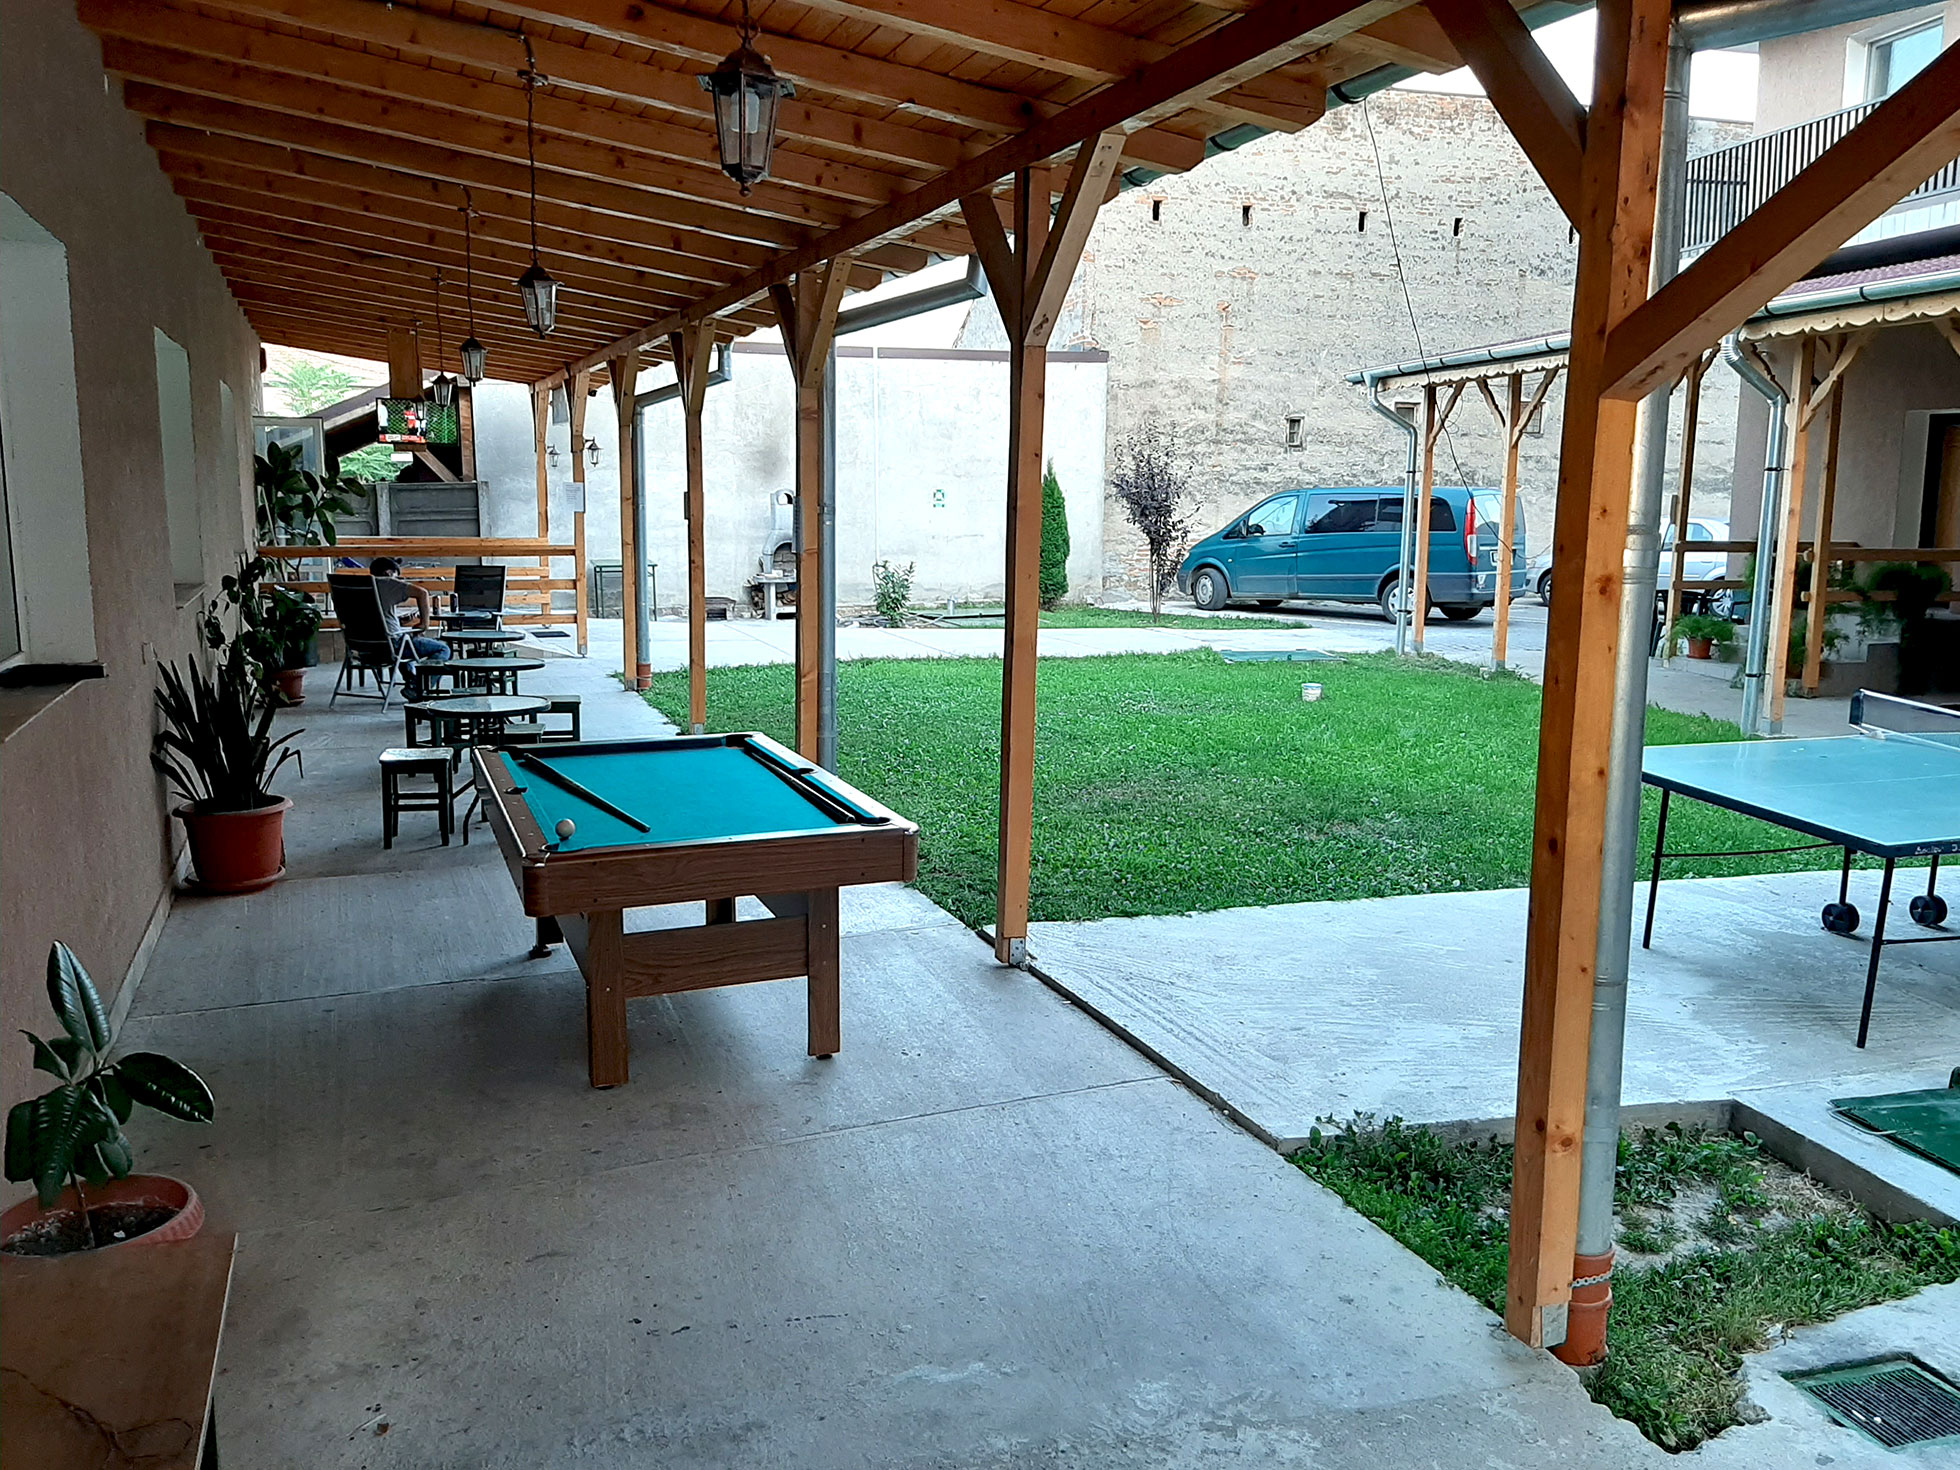 Pension Atlas Ilia - inner courtyard with pool table